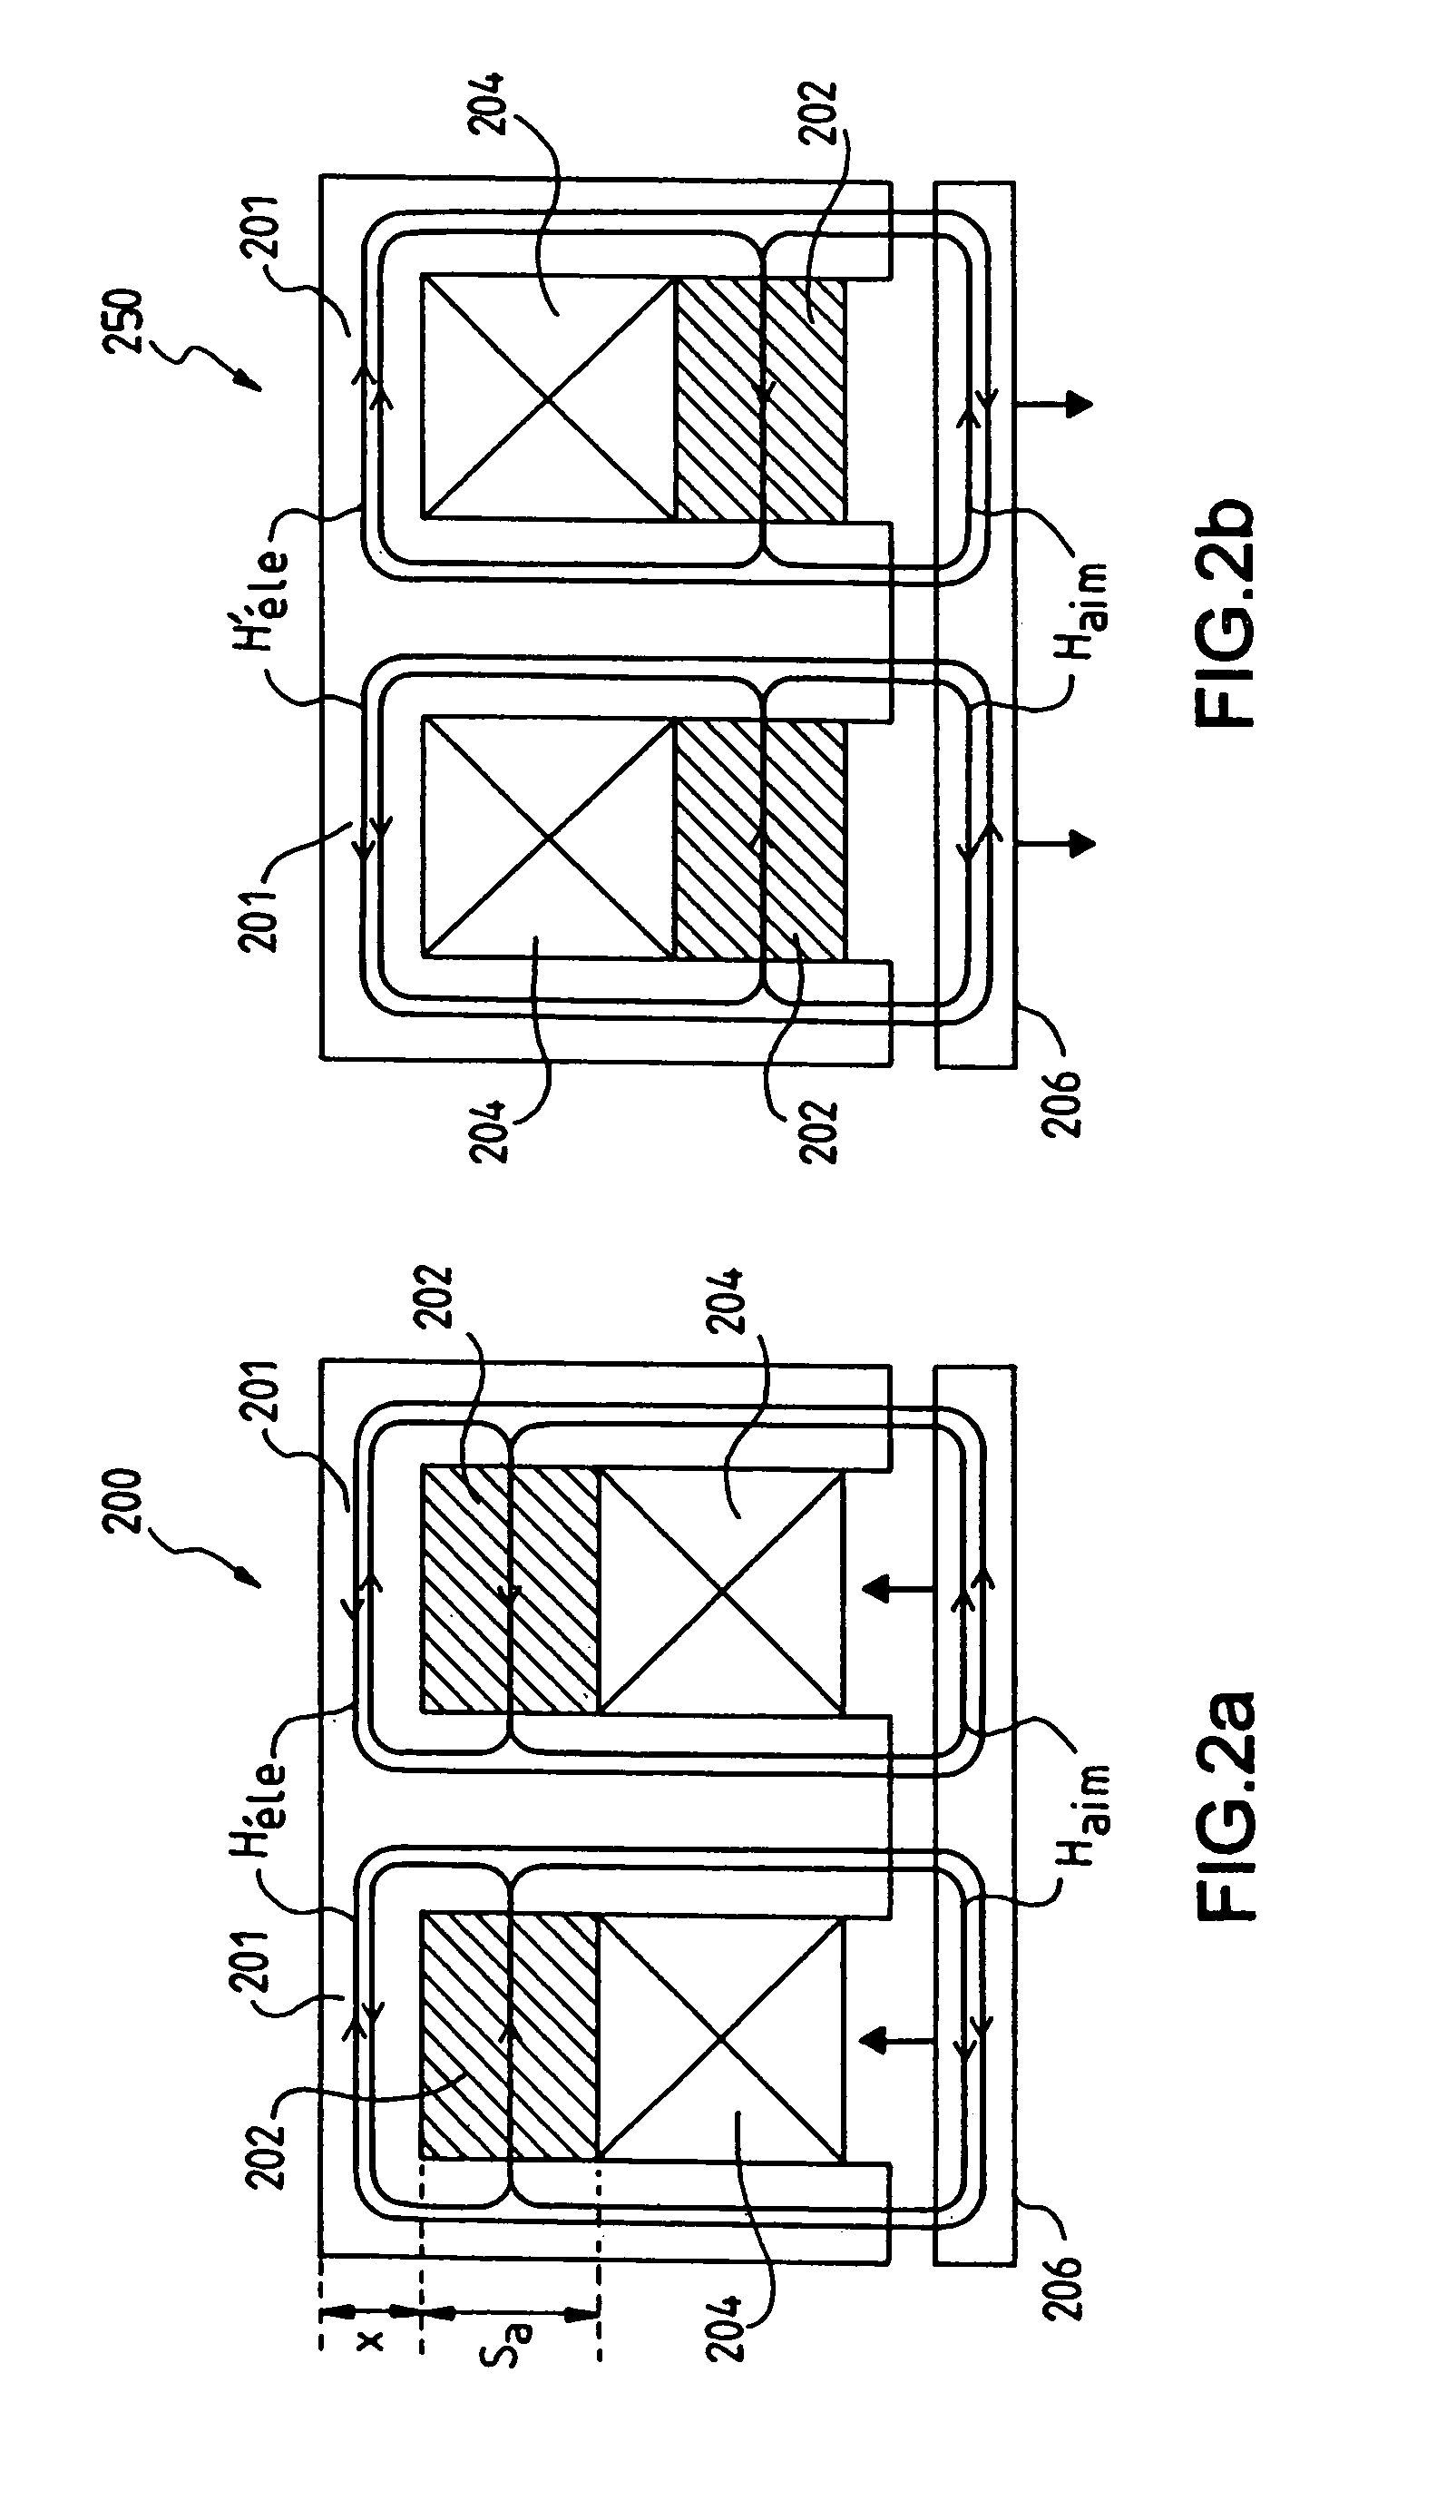 Electromagnetic actuator for controlling a valve of an internal combustion engine and internal combustion engine equipped with such an actuator